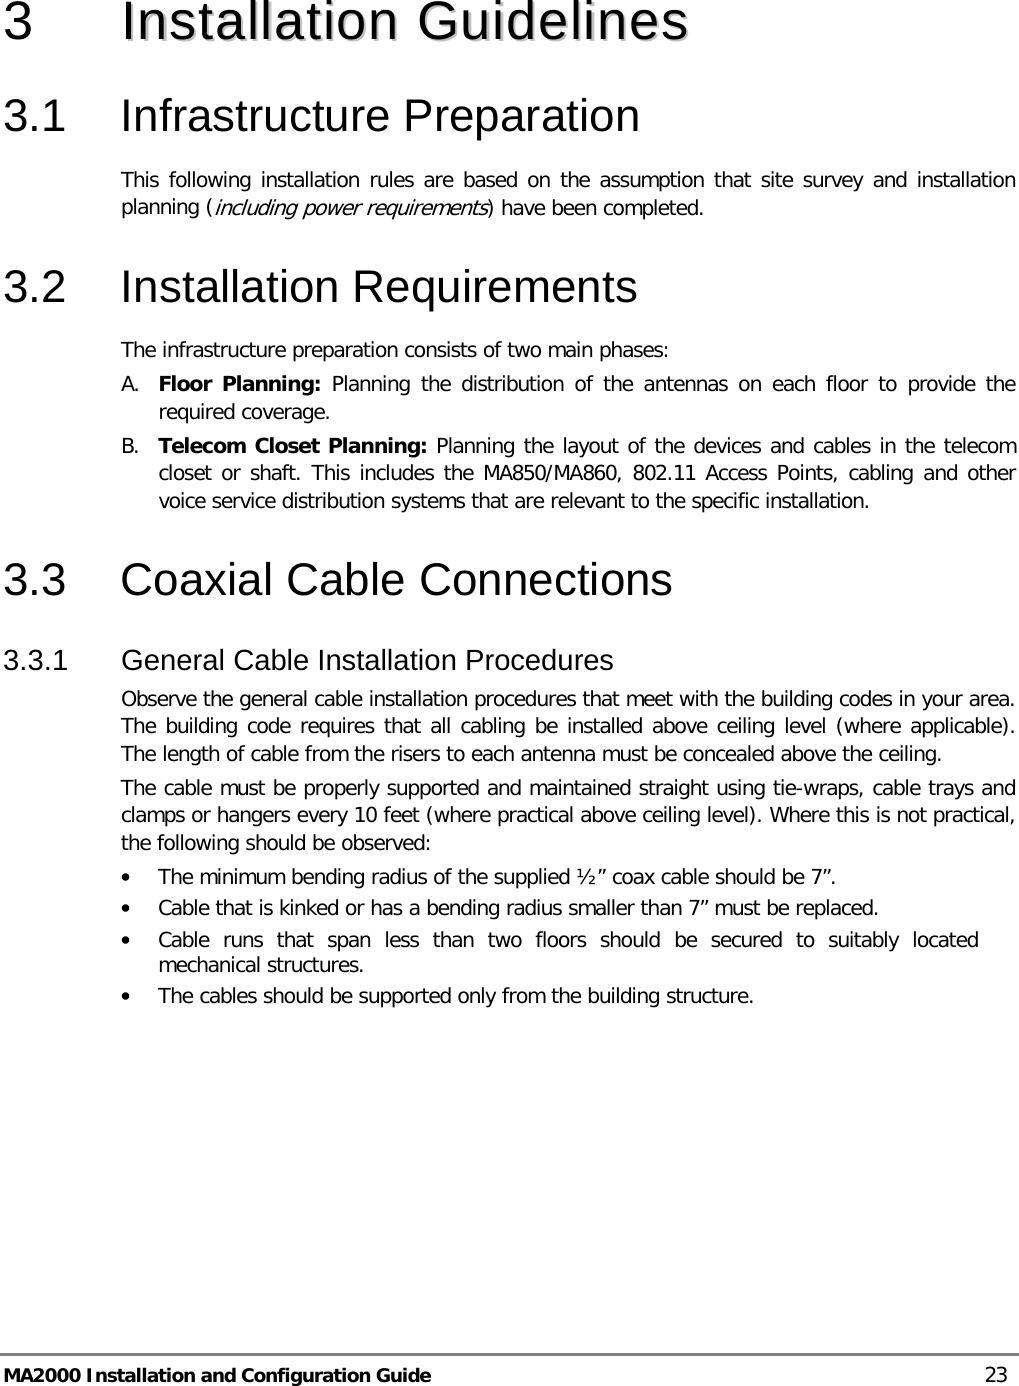  MA2000 Installation and Configuration Guide    23  3  IInnssttaallllaattiioonn  GGuuiiddeelliinneess  3.1  Infrastructure Preparation This following installation rules are based on the assumption that site survey and installation planning (including power requirements) have been completed.  3.2  Installation Requirements The infrastructure preparation consists of two main phases: A. Floor Planning: Planning the distribution of the antennas on each floor to provide the required coverage.  B. Telecom Closet Planning: Planning the layout of the devices and cables in the telecom closet or shaft. This includes the MA850/MA860, 802.11 Access Points, cabling and other voice service distribution systems that are relevant to the specific installation. 3.3  Coaxial Cable Connections 3.3.1  General Cable Installation Procedures Observe the general cable installation procedures that meet with the building codes in your area. The building code requires that all cabling be installed above ceiling level (where applicable). The length of cable from the risers to each antenna must be concealed above the ceiling.  The cable must be properly supported and maintained straight using tie-wraps, cable trays and clamps or hangers every 10 feet (where practical above ceiling level). Where this is not practical, the following should be observed: • The minimum bending radius of the supplied ½” coax cable should be 7”. • Cable that is kinked or has a bending radius smaller than 7” must be replaced. • Cable runs that span less than two floors should be secured to suitably located mechanical structures. • The cables should be supported only from the building structure.    